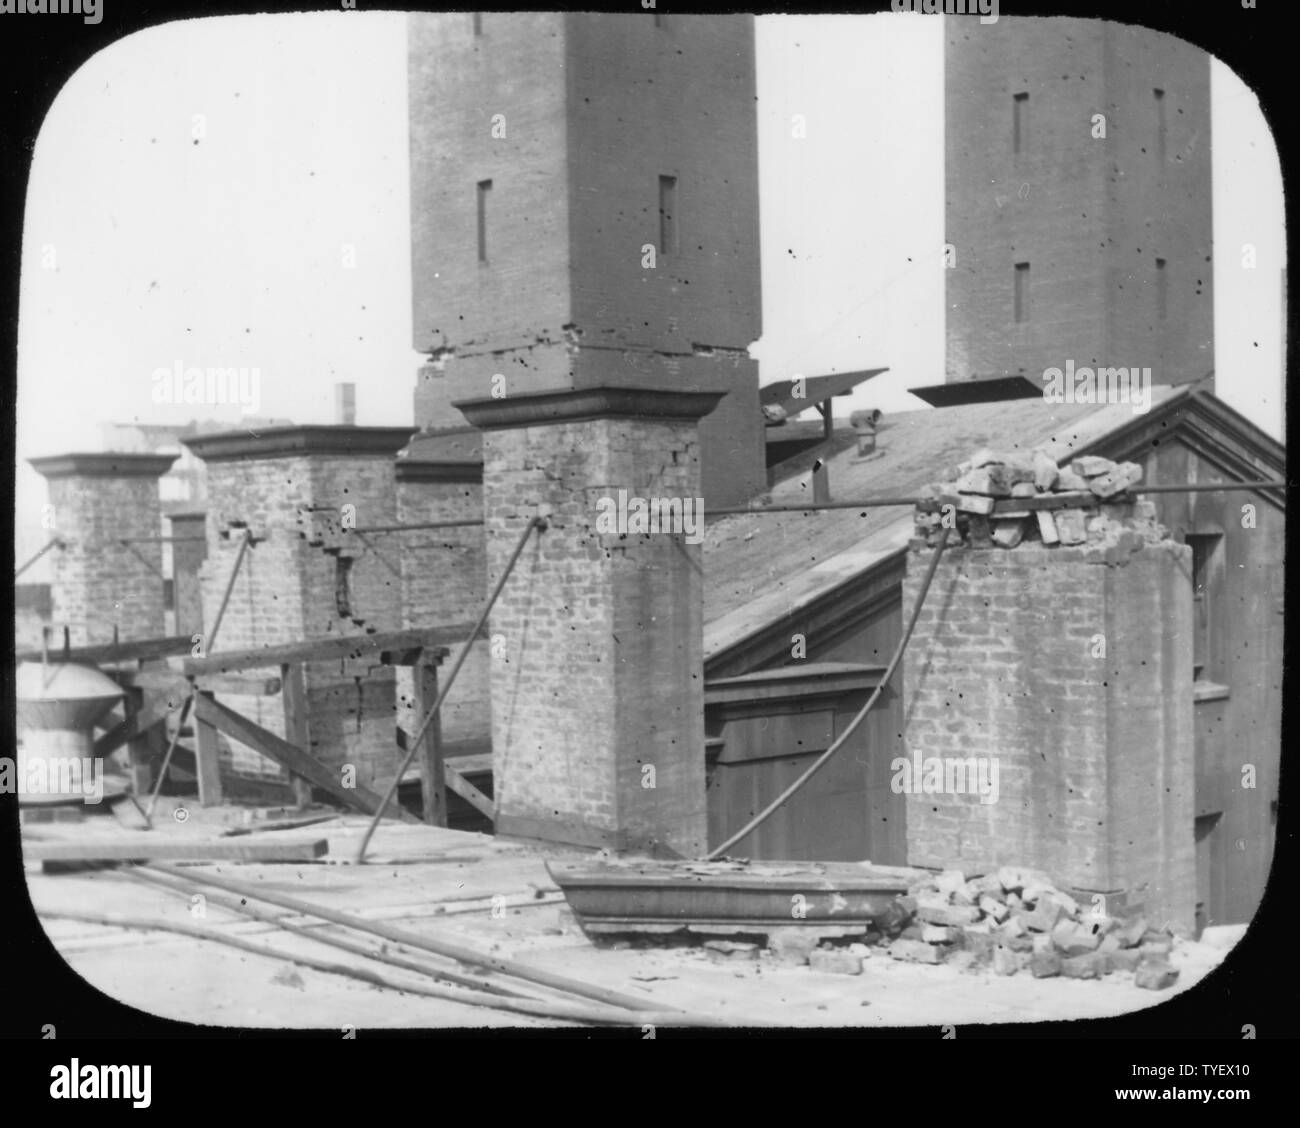 Photograph of damage done to the San Francisco Mint chimneys during the 1906 Earthquake. Smaller chimneys from the melting furnaces are in the foreground. Larger chimneys connected to the Mint's main engine and boiler are in the background. Stock Photo